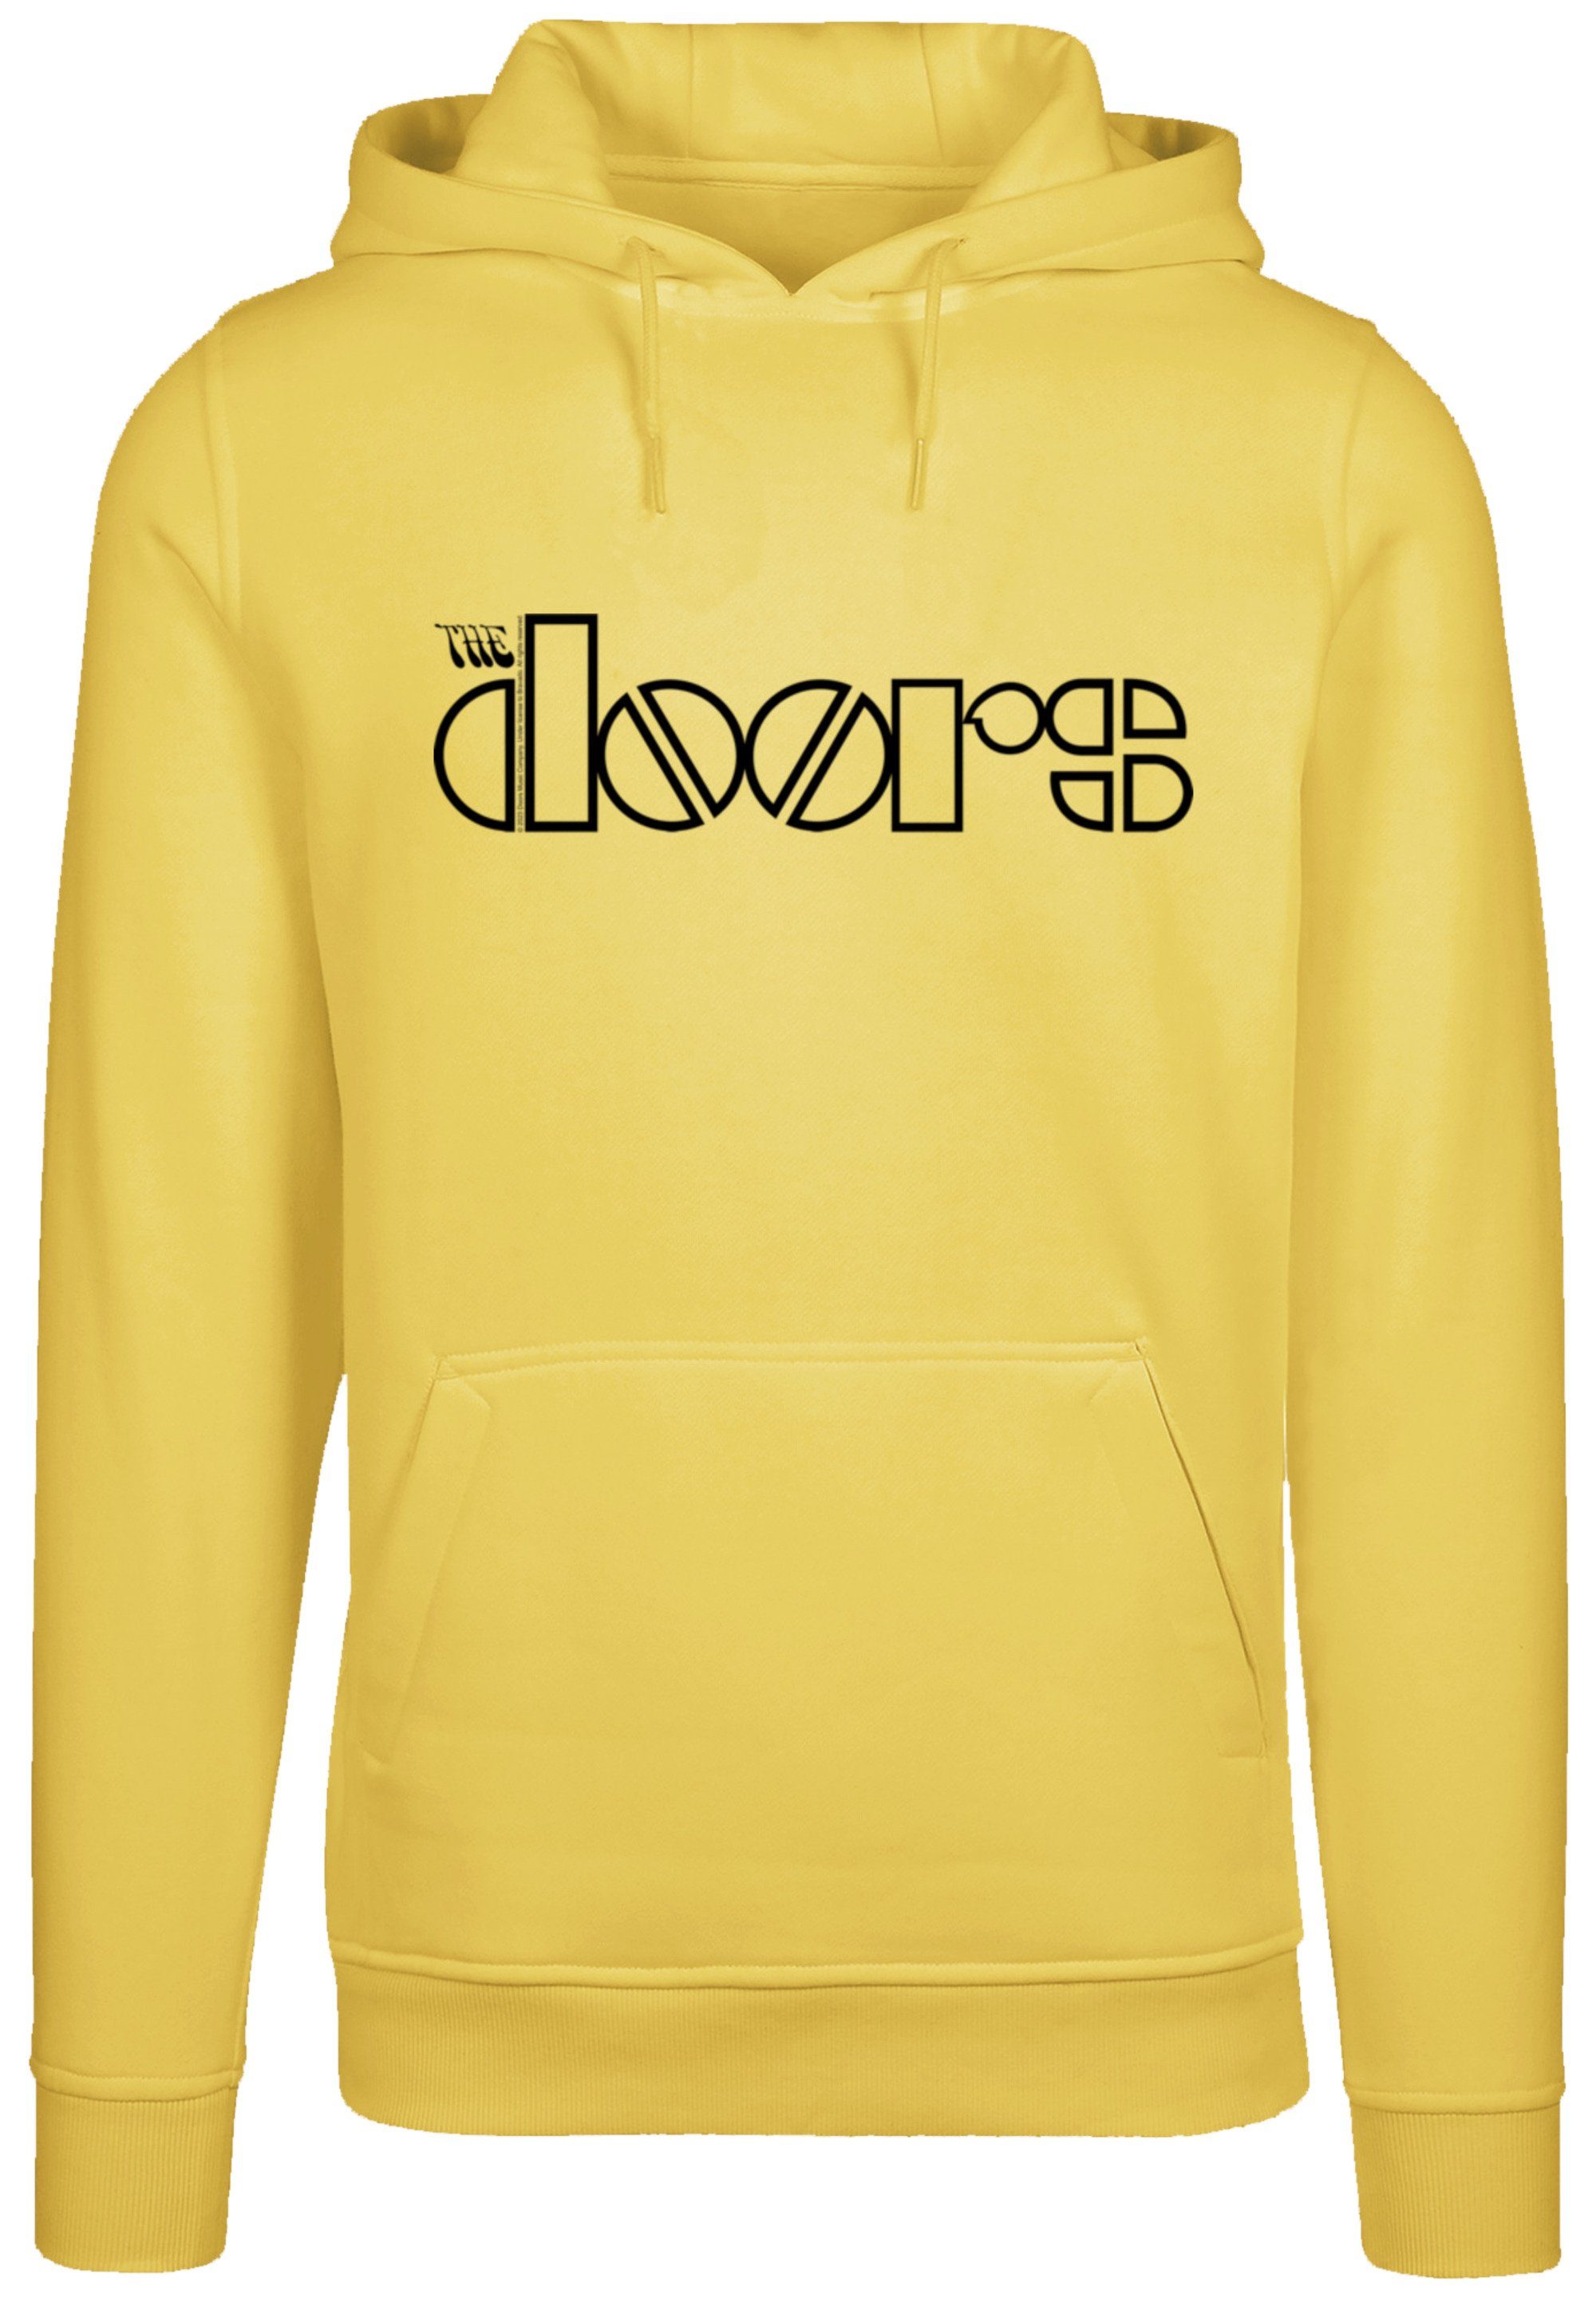 Logo yellow Premium Band Simple taxi Music Doors Logo The Hoodie Band, F4NT4STIC Qualität,